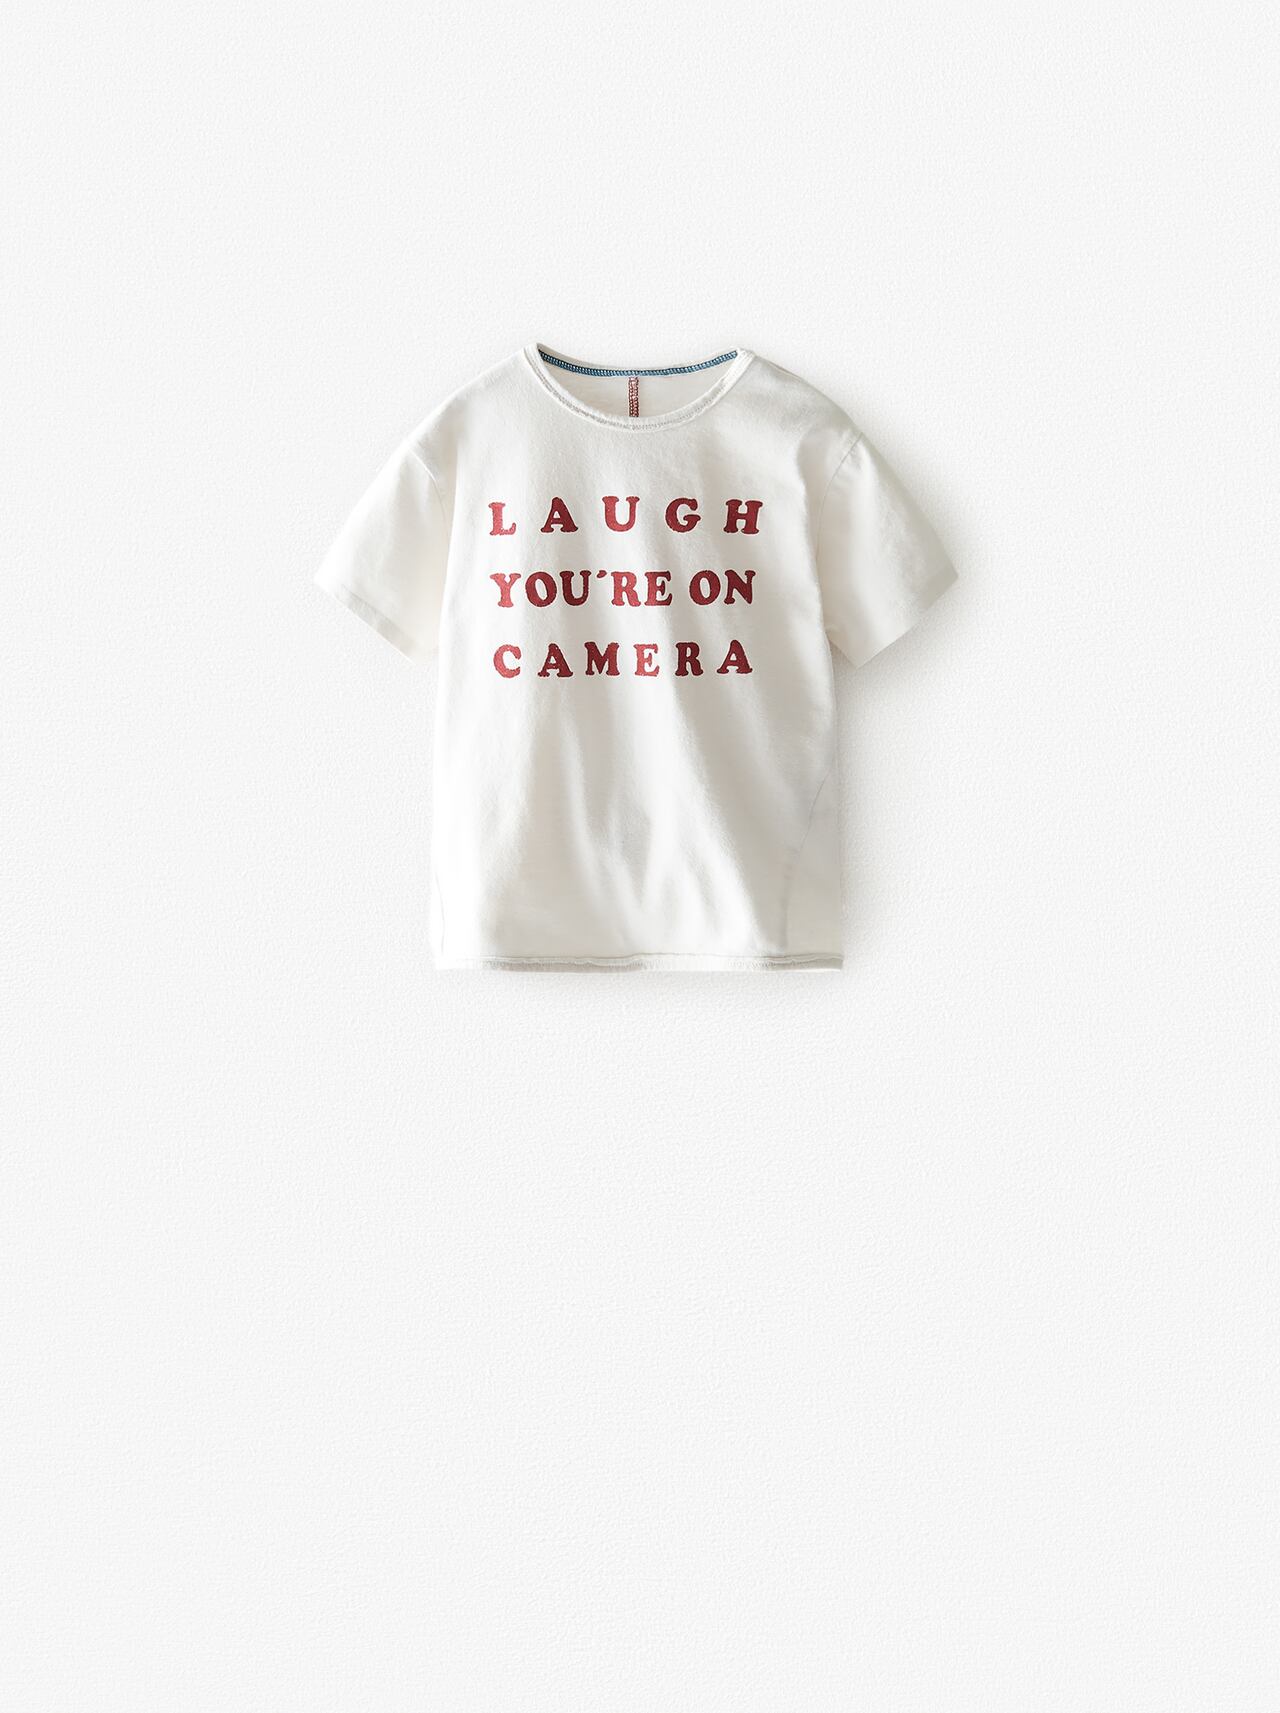 You're on Camera T-Shirt